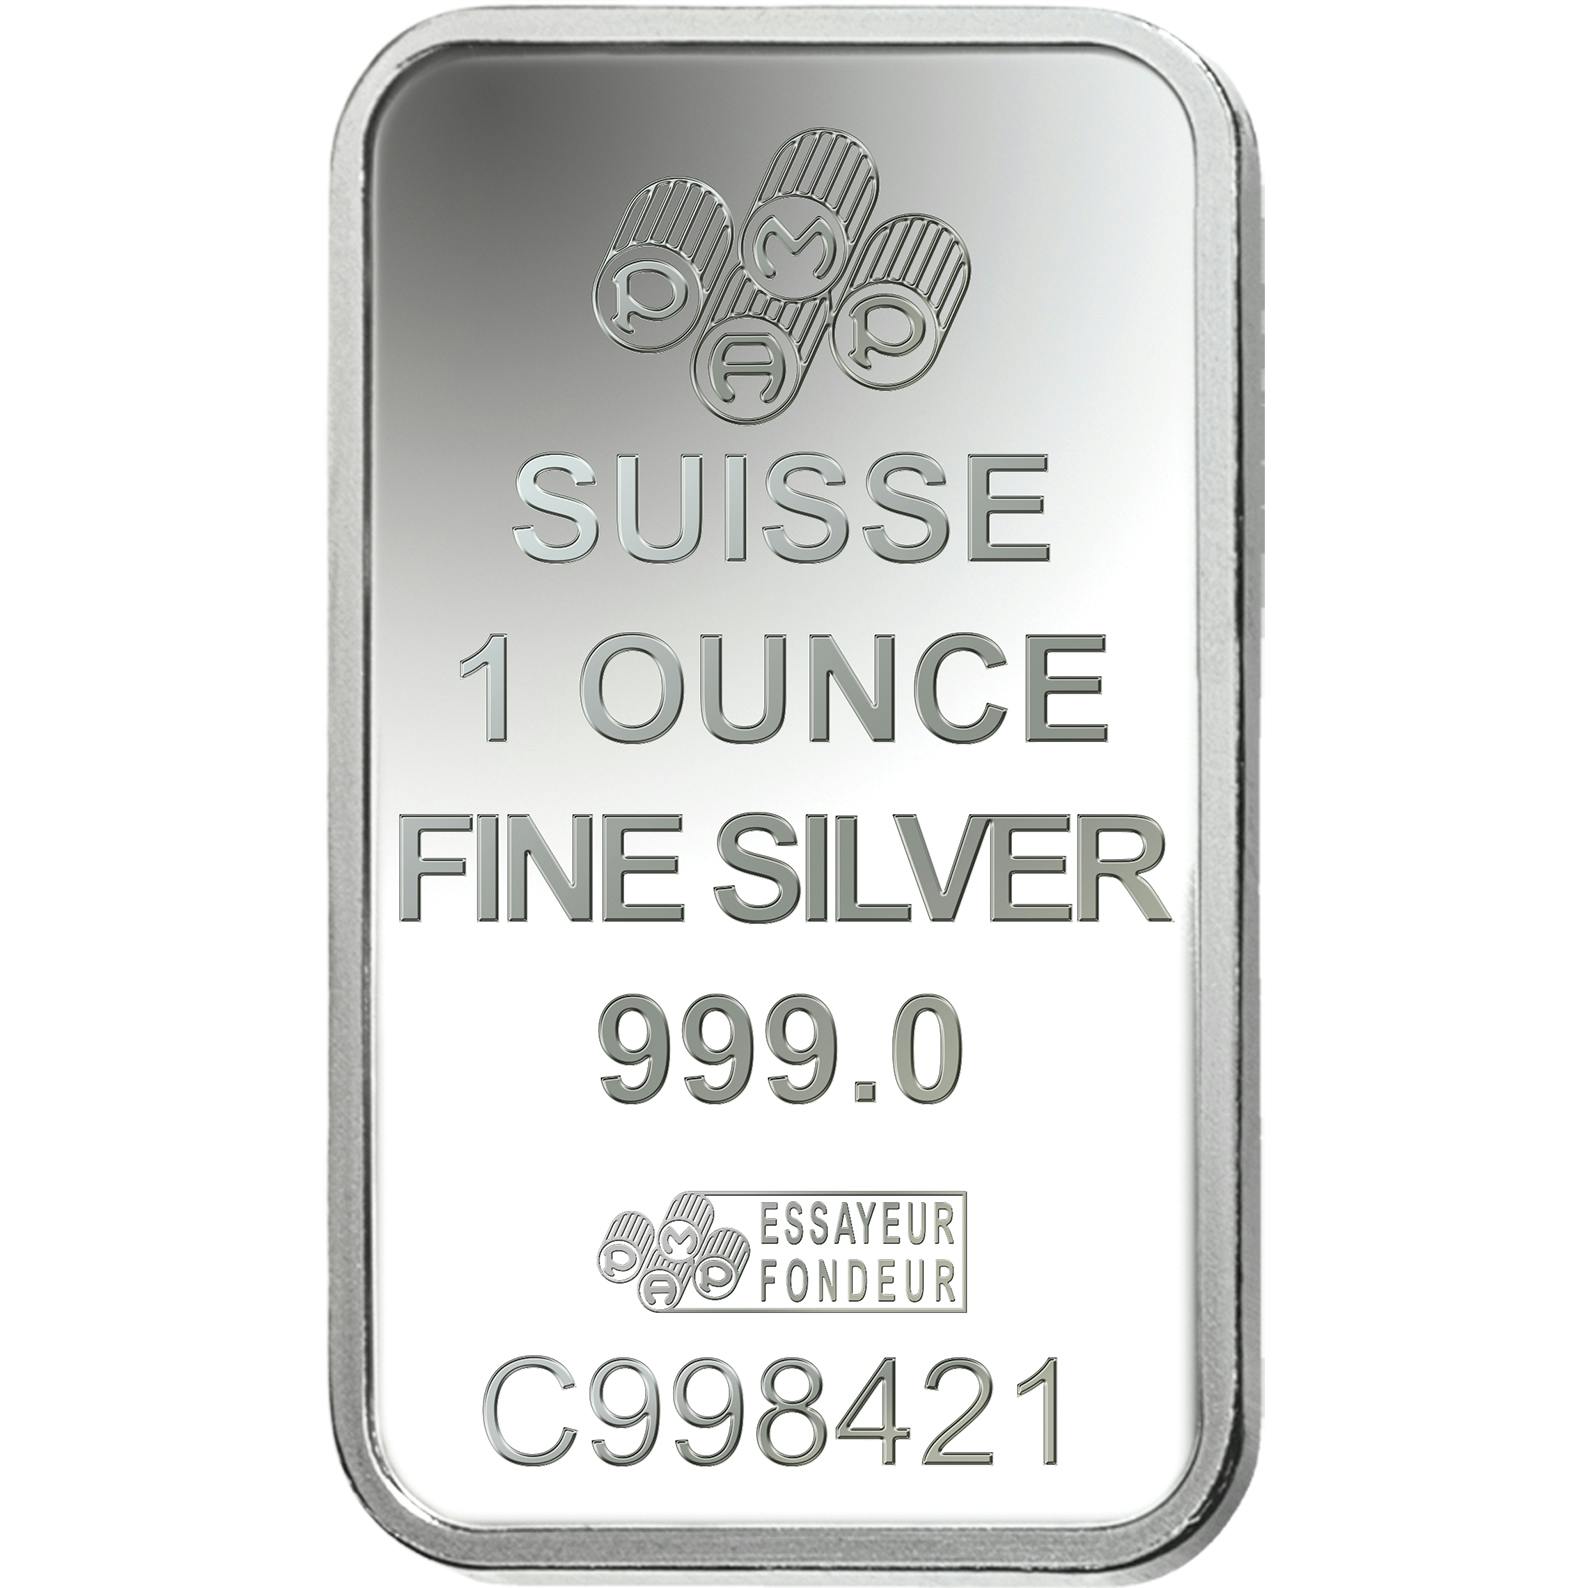 Invest in 1 oz Fine Silver Buddha - PAMP Swiss - Back